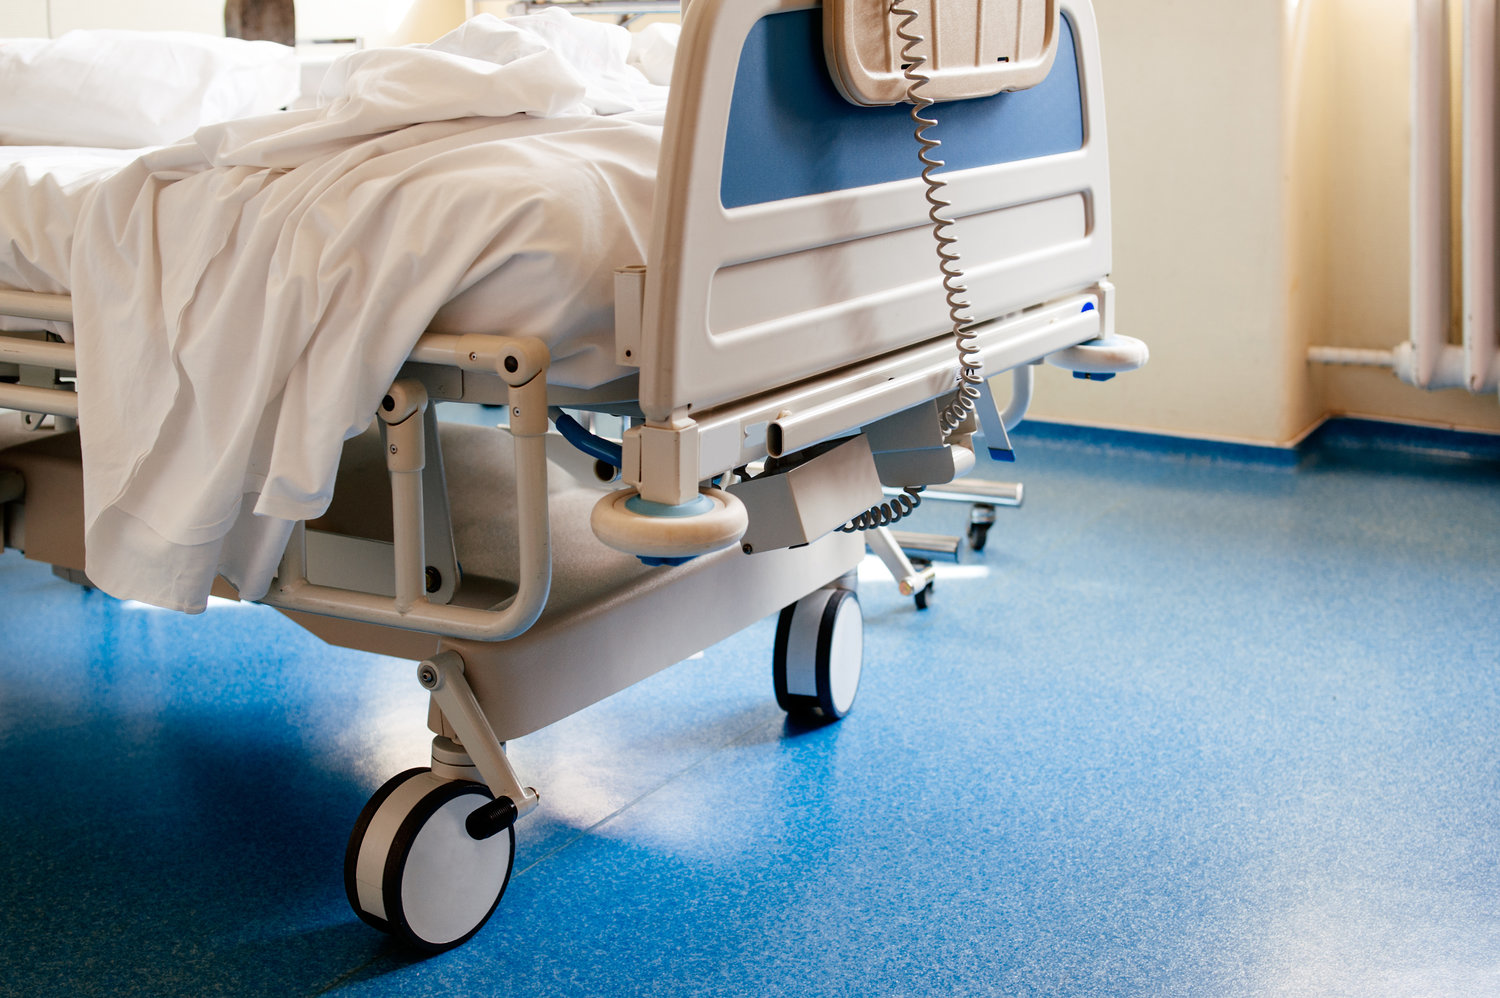 Over 70 Percent Of Florida's Hospital Beds Occupied